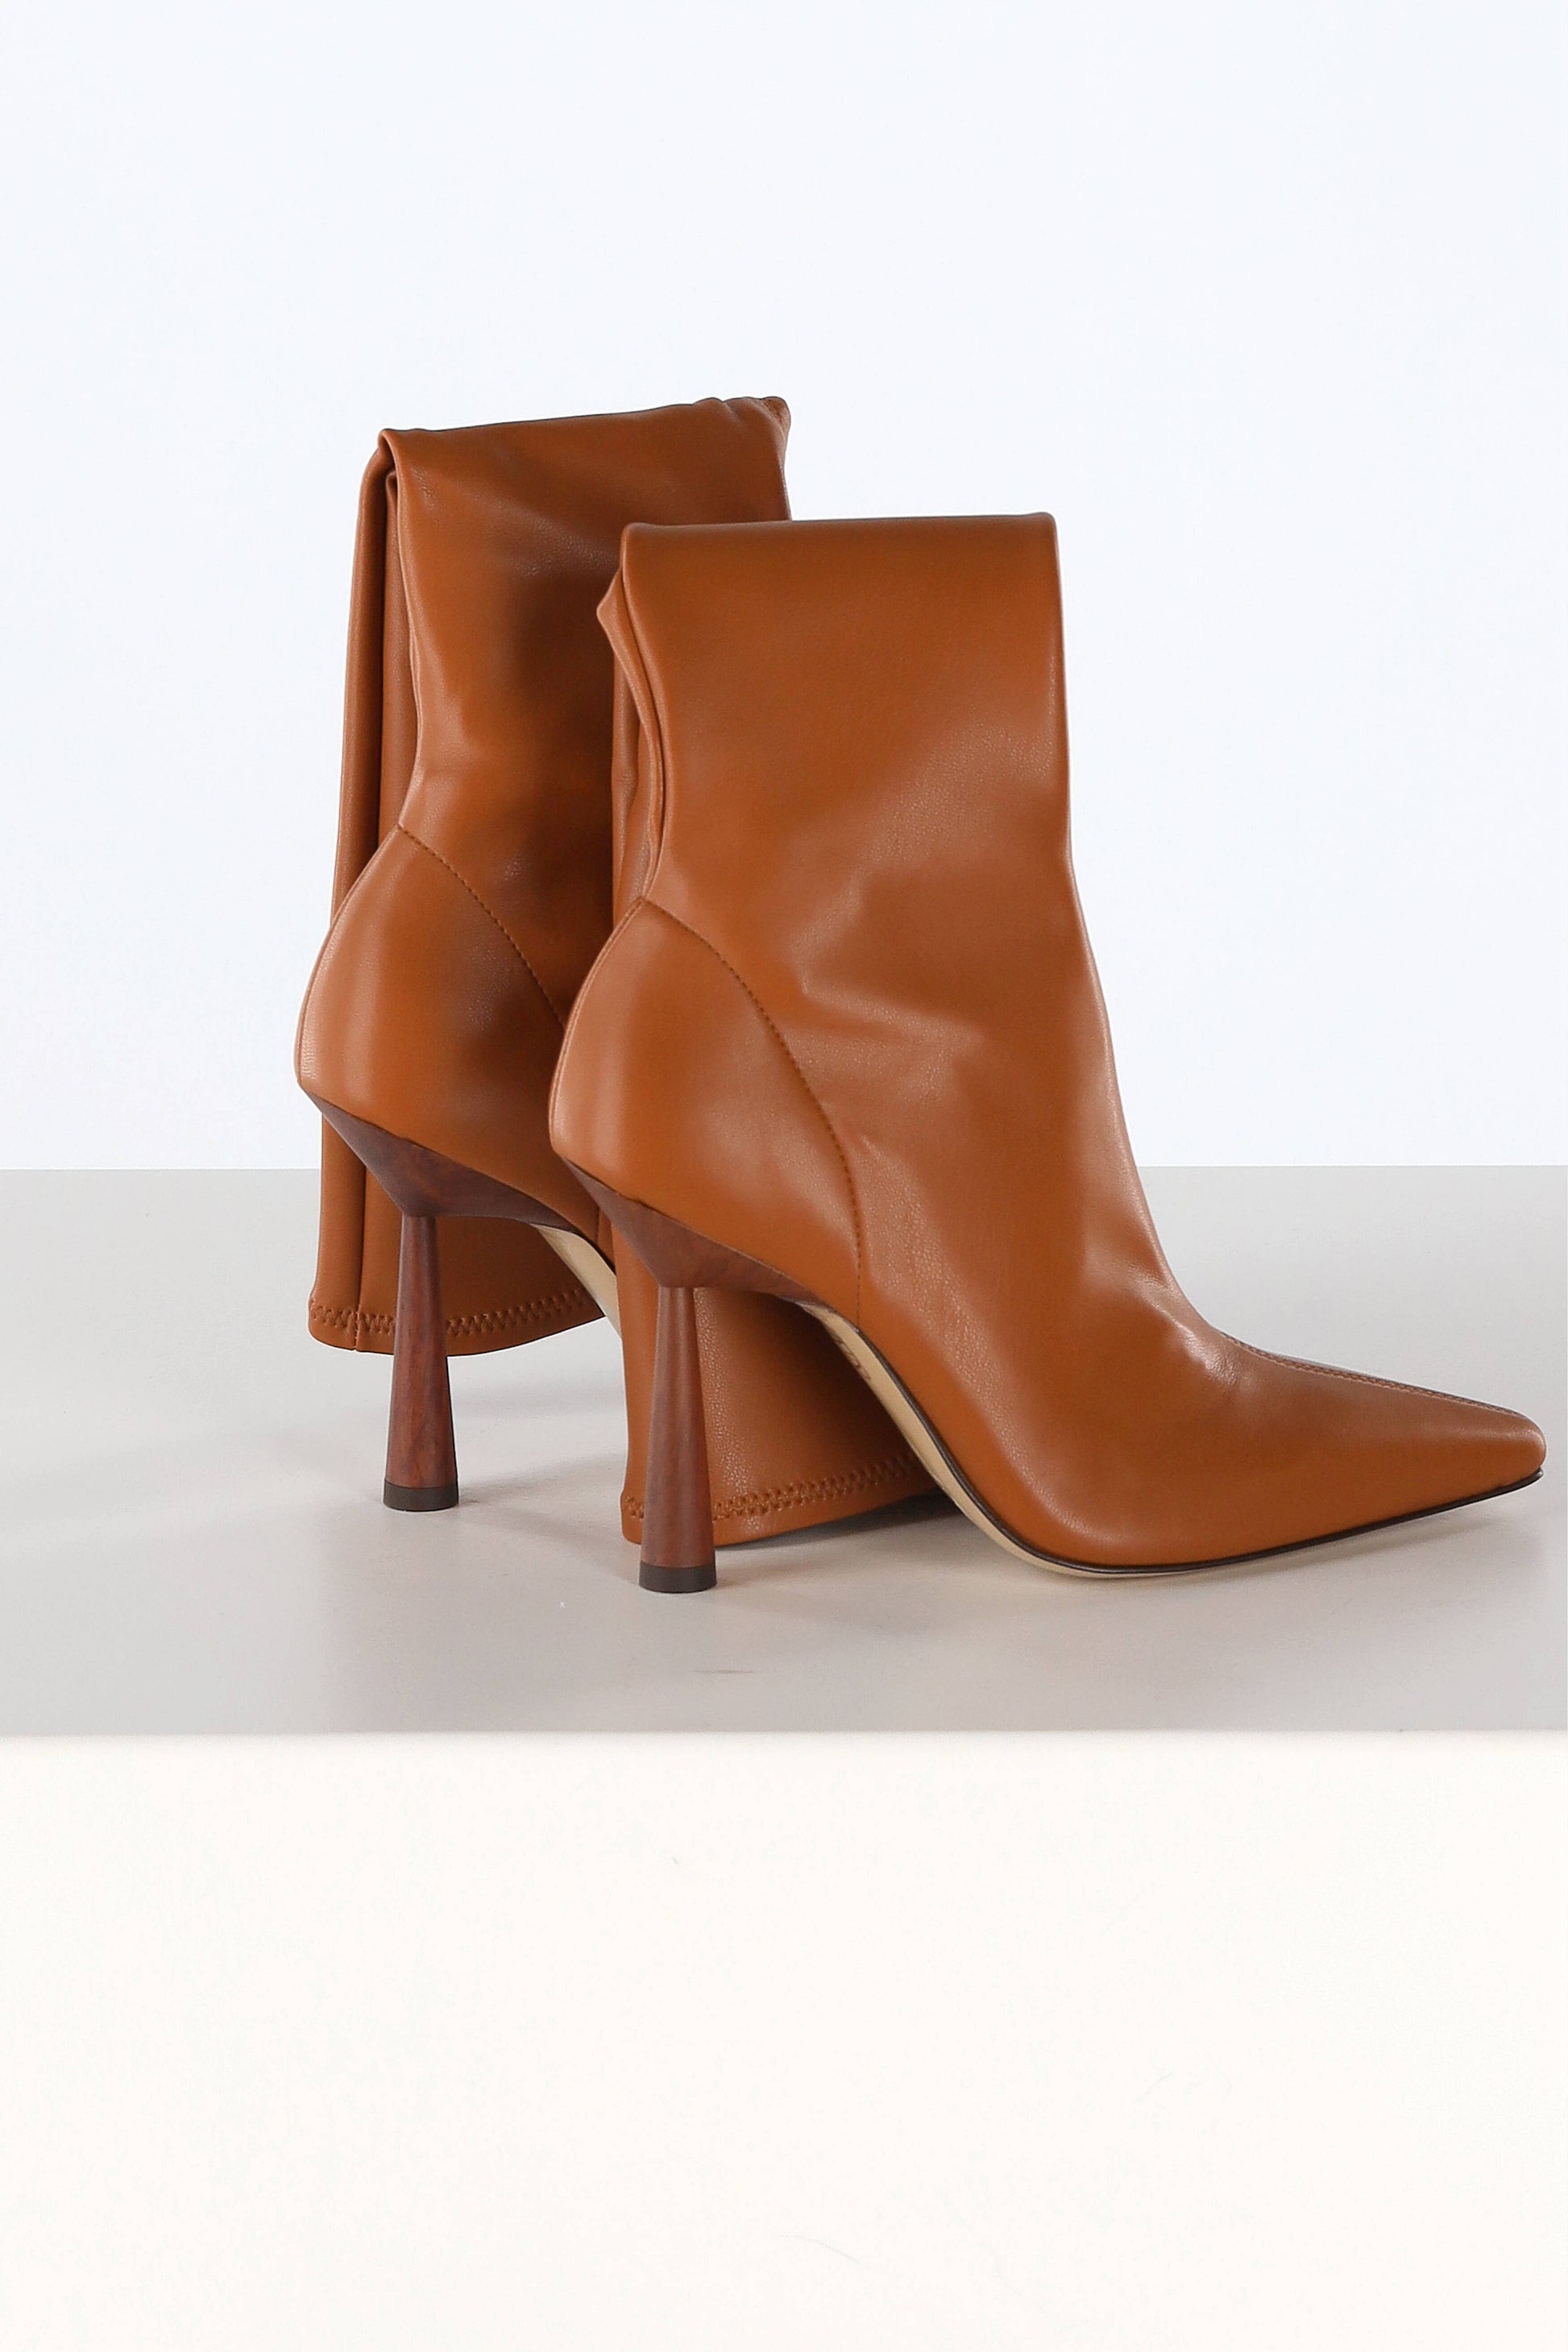 Stiefel Rosie 8 in Sudan BrownGia x RHW - Anita Hass